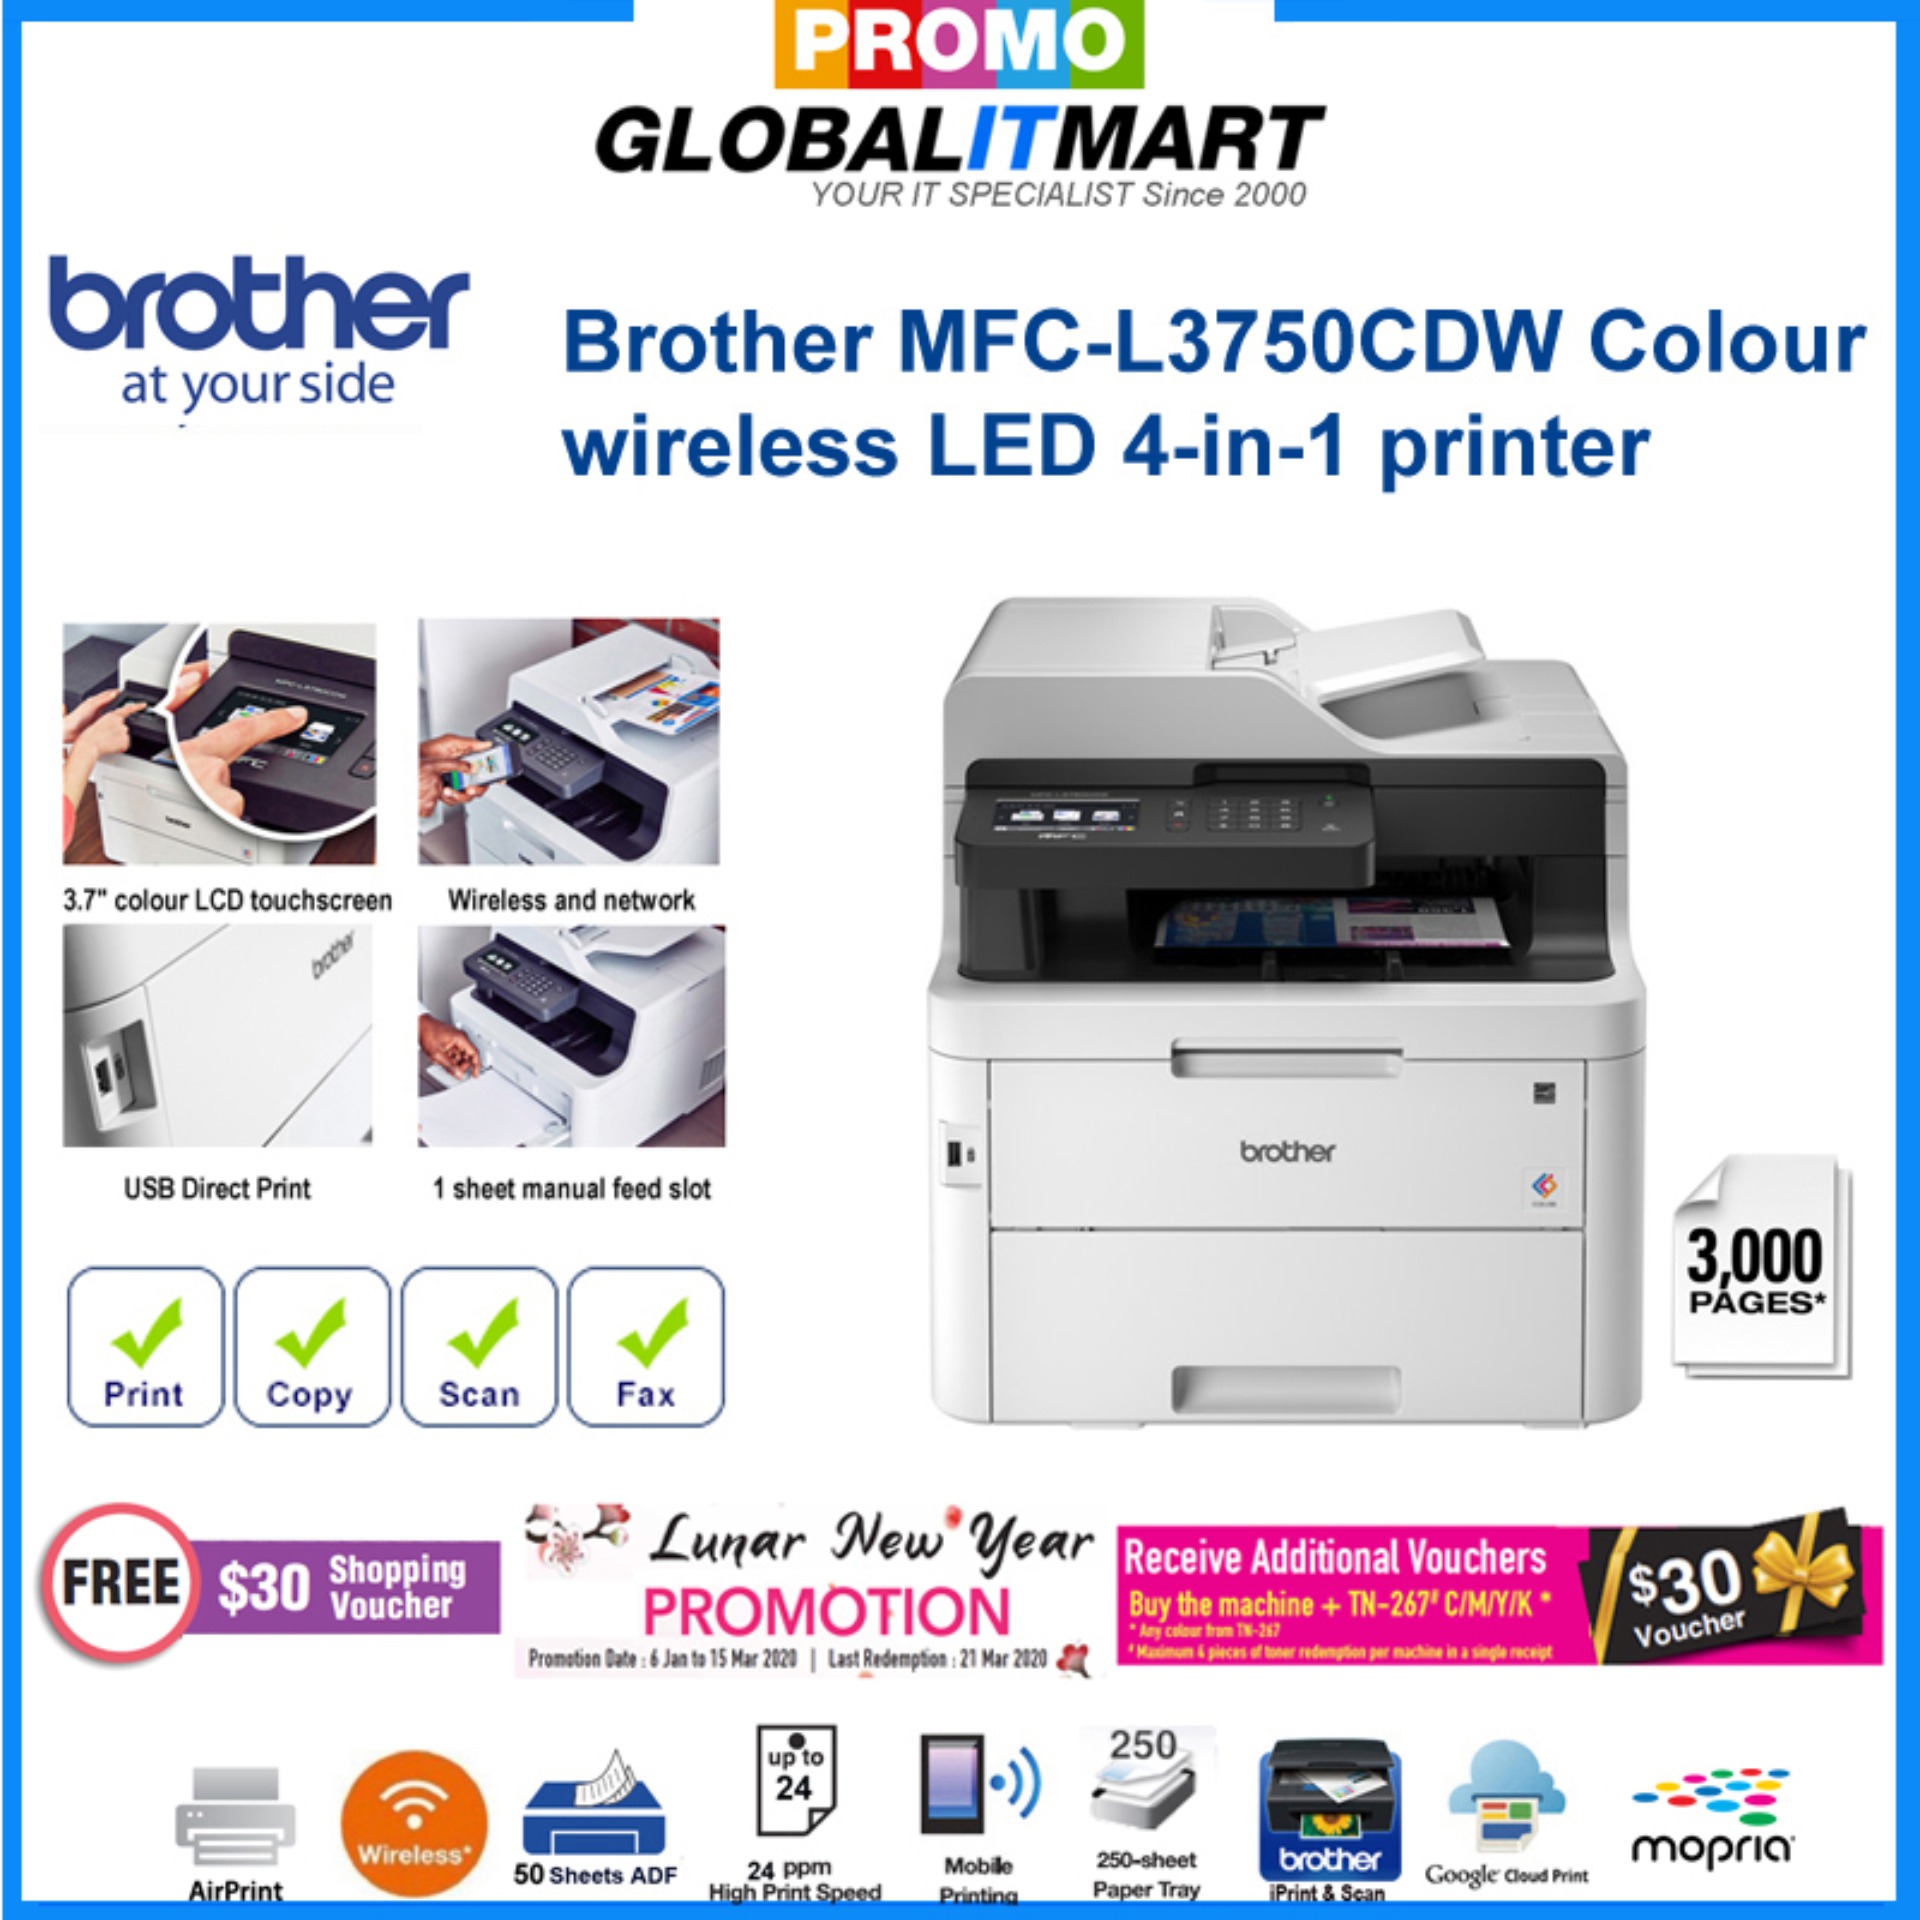 brother mfc 7860dw manual feeder